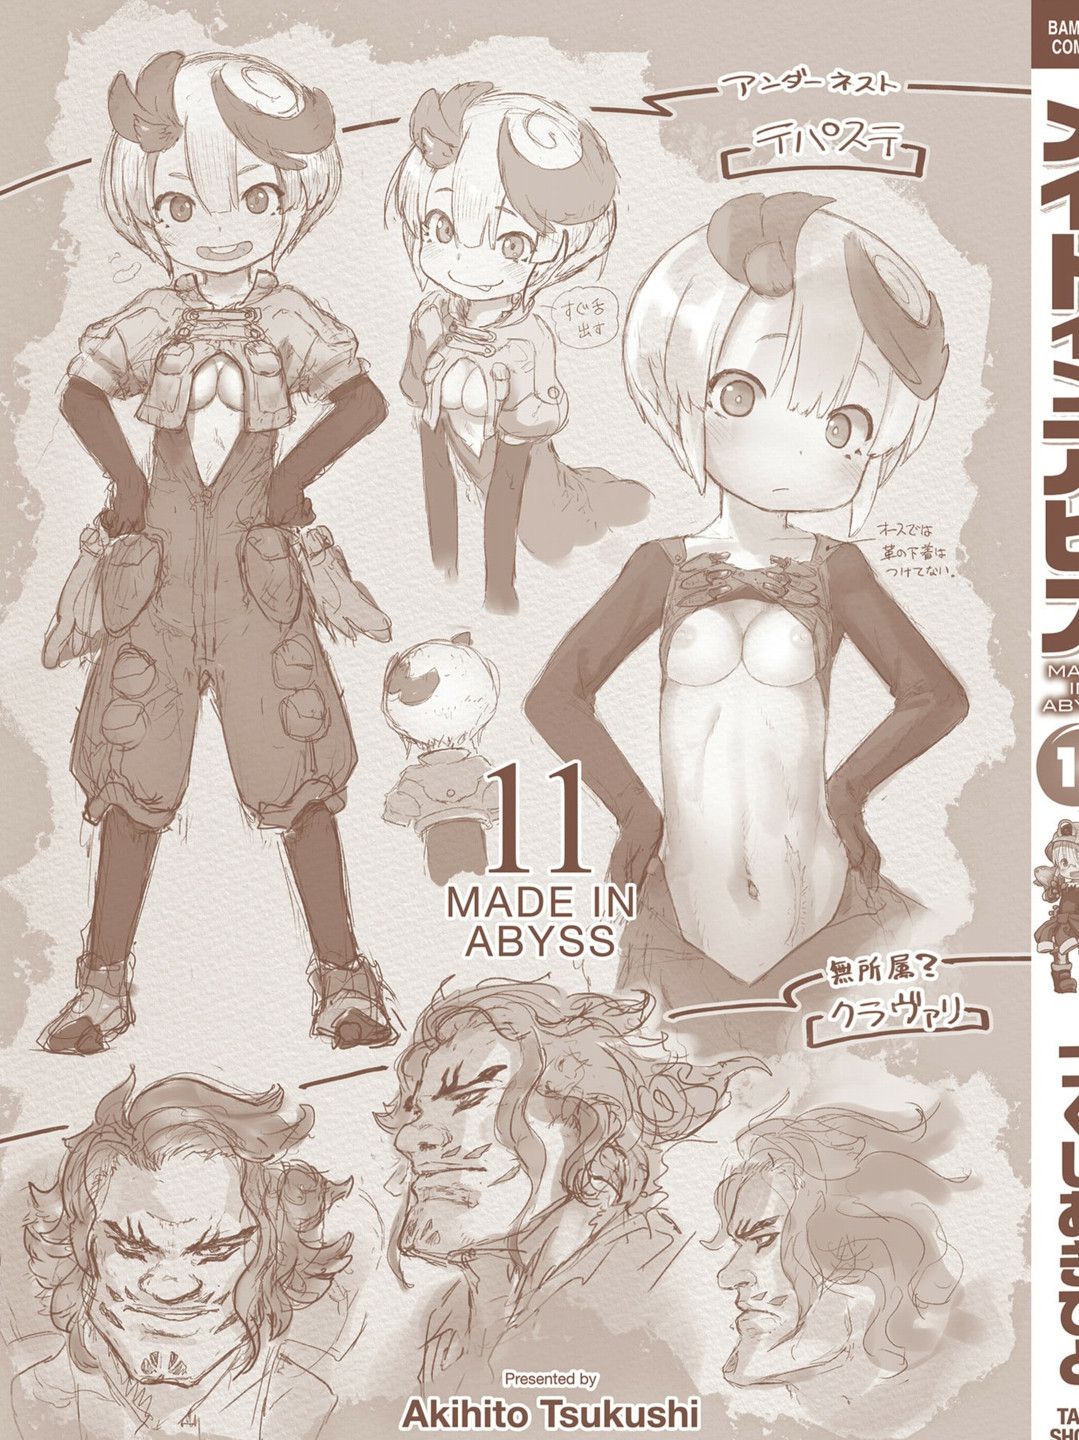 【Sad news】 Made in Abyss latest book, finally lifting the ban on girls' nipples wwwwwww 1